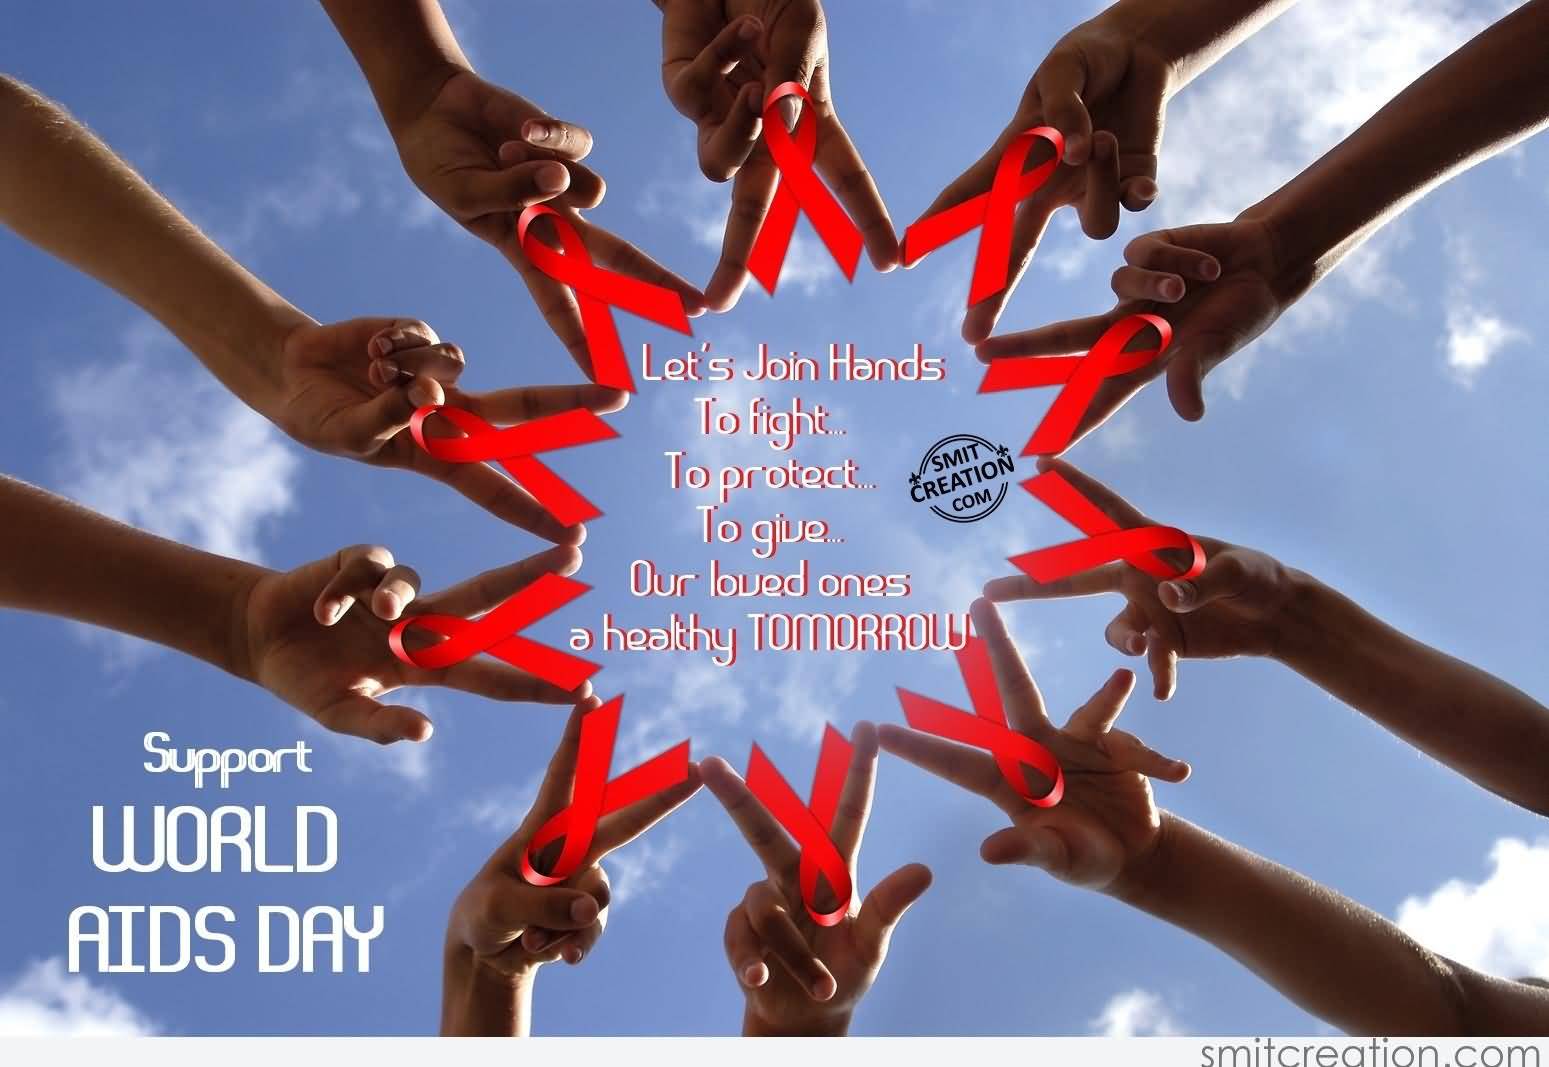 Let’s Join Hands To Fight To Protect To Give Our Loved Ones A Healthy Tomorrow Support World Aids Day